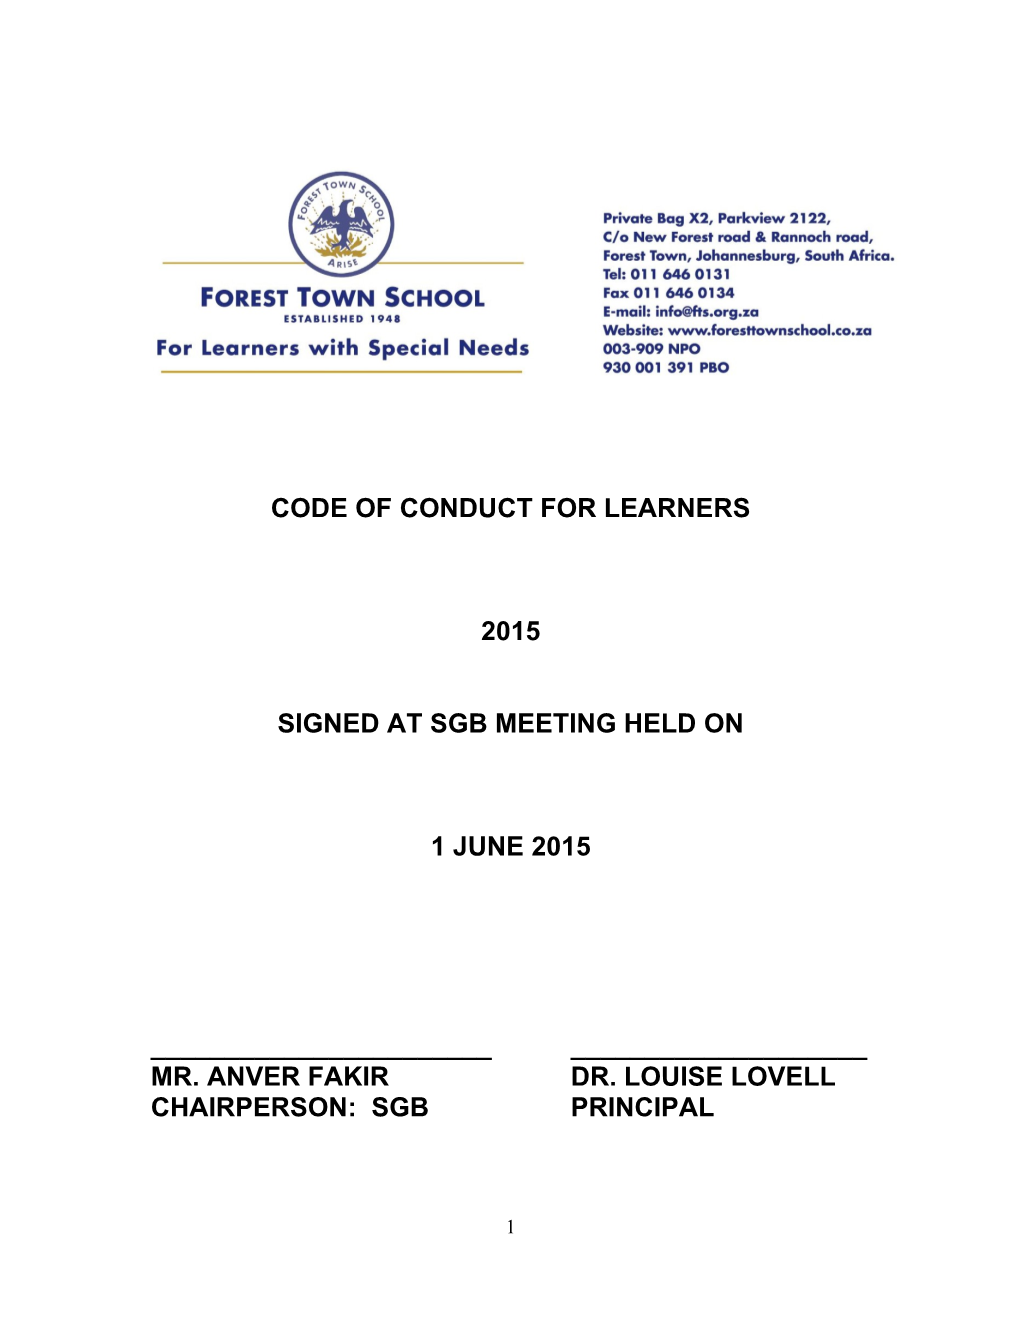 The Governing Body Code of Conduct for Learners at Forest Town School